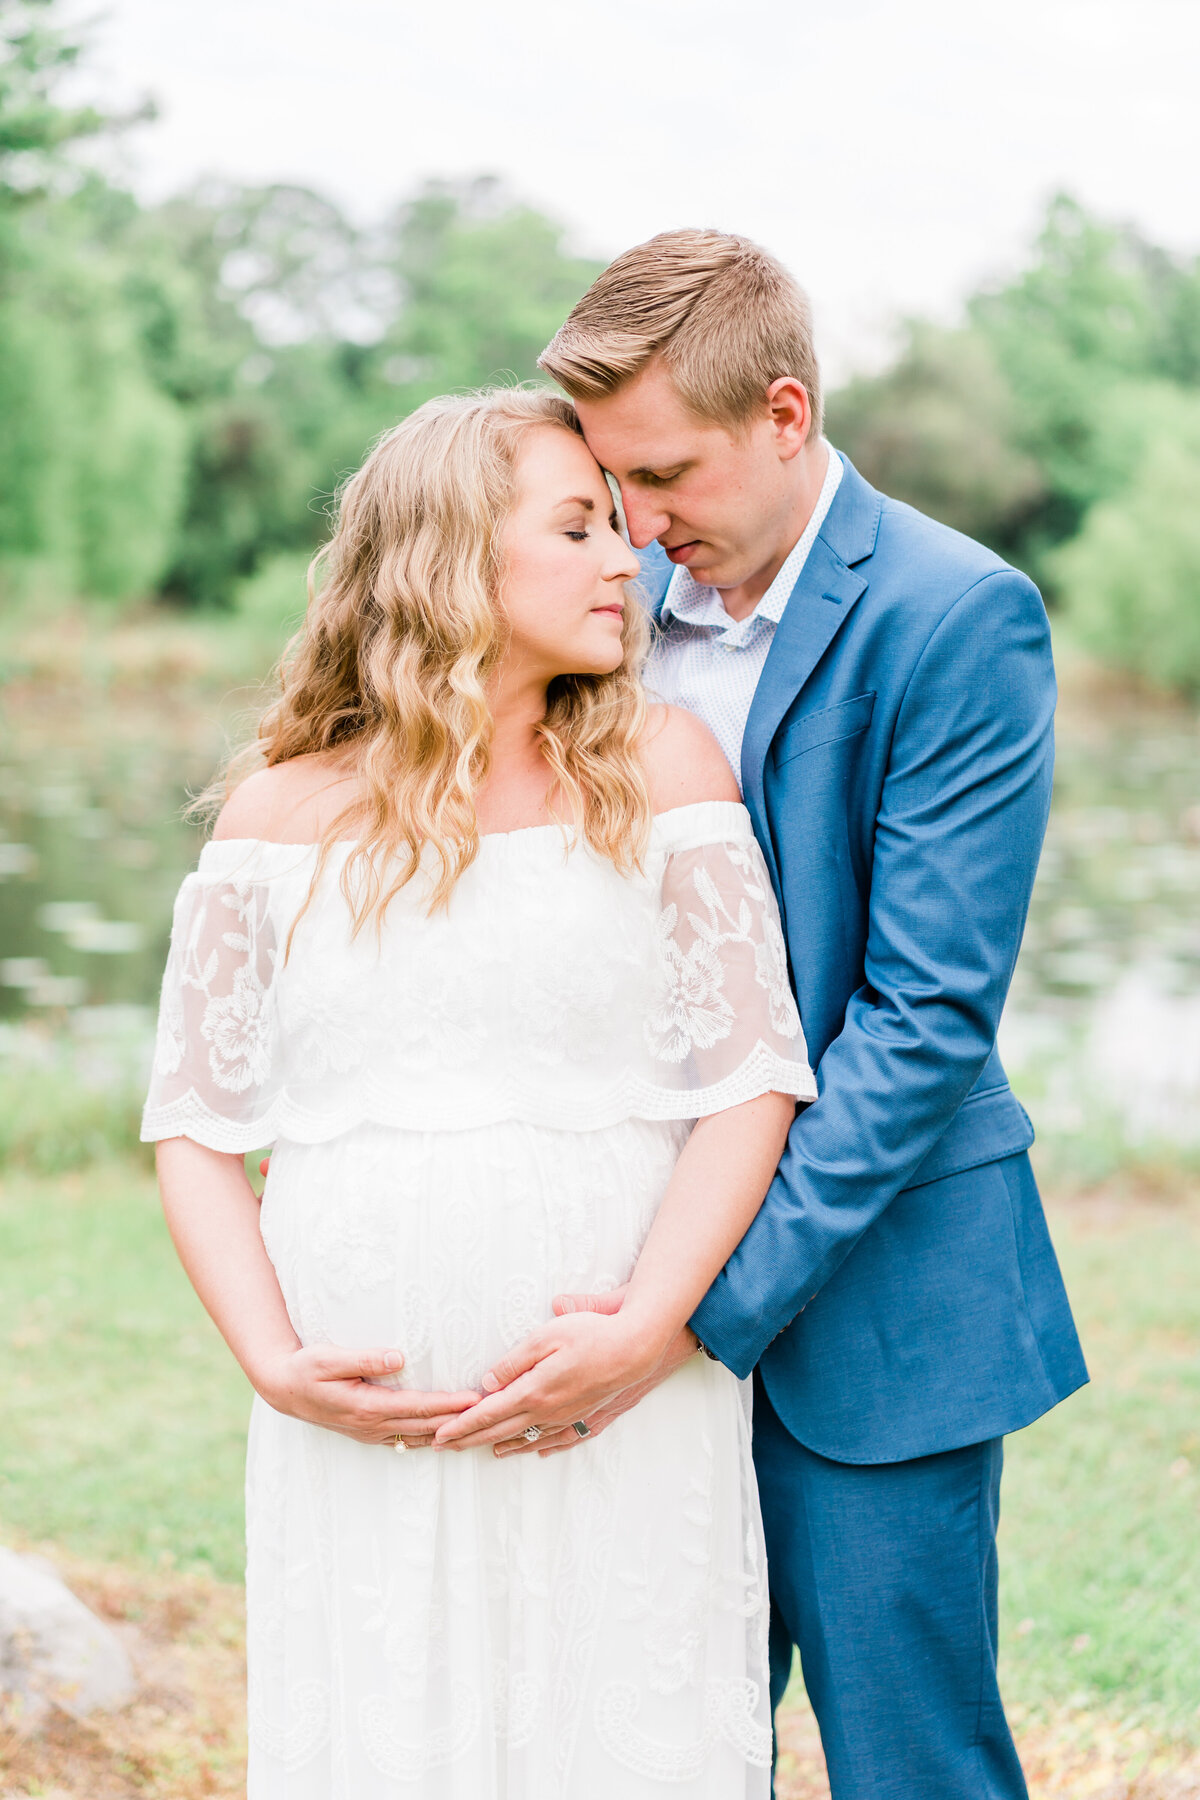 Maternity photoshoot in a park in Alabama